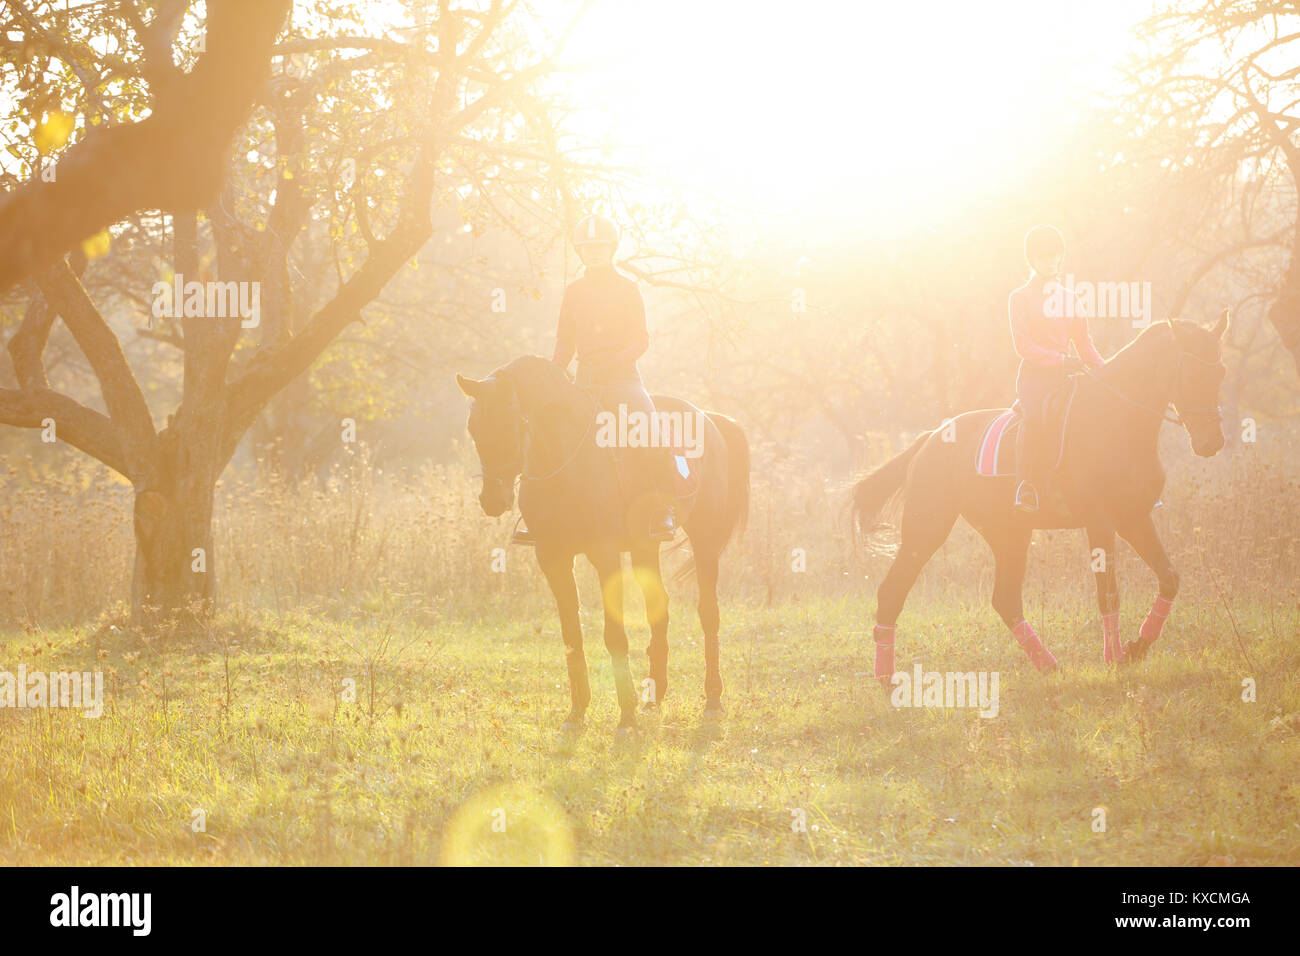 Group of rider girls walking with horses in park in sunset beams. Equestrian recreation activities background with copy space Stock Photo